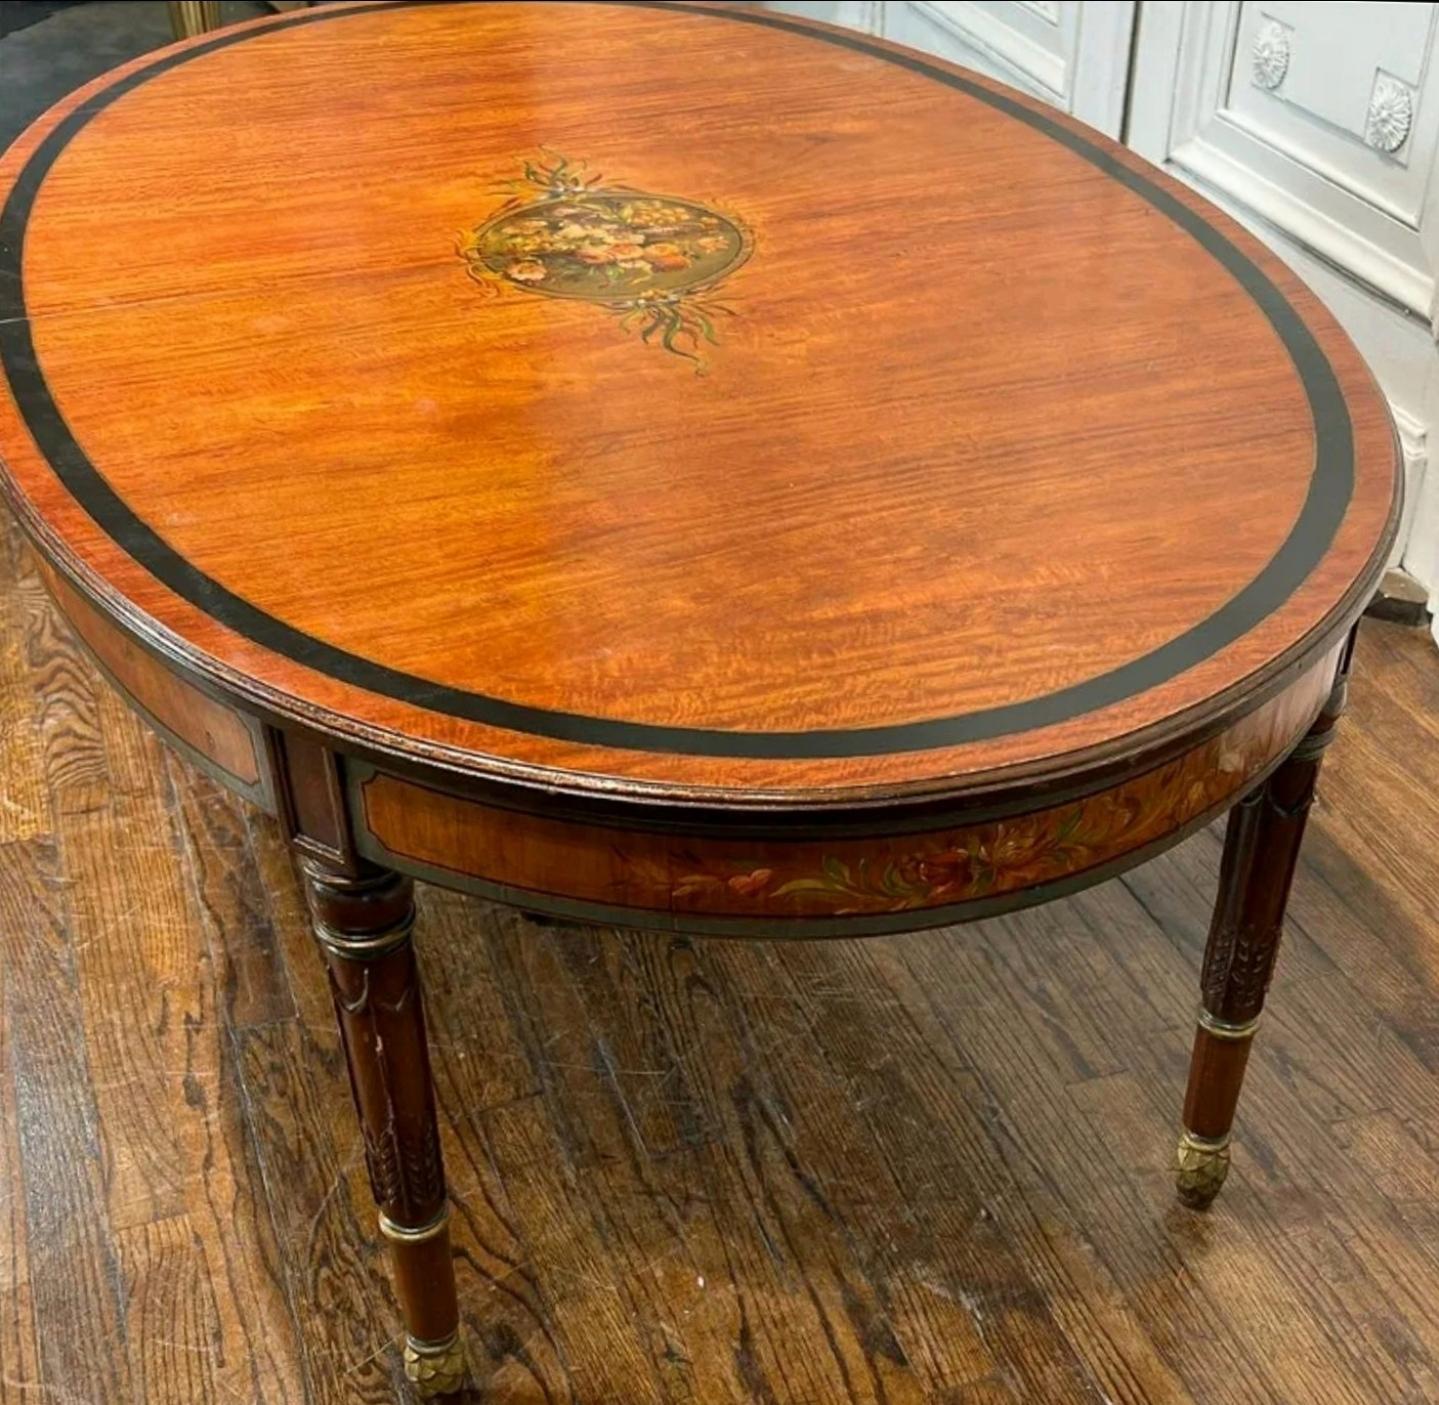 English Edwardian Period Adam Style Cocktail Table For Sale 3